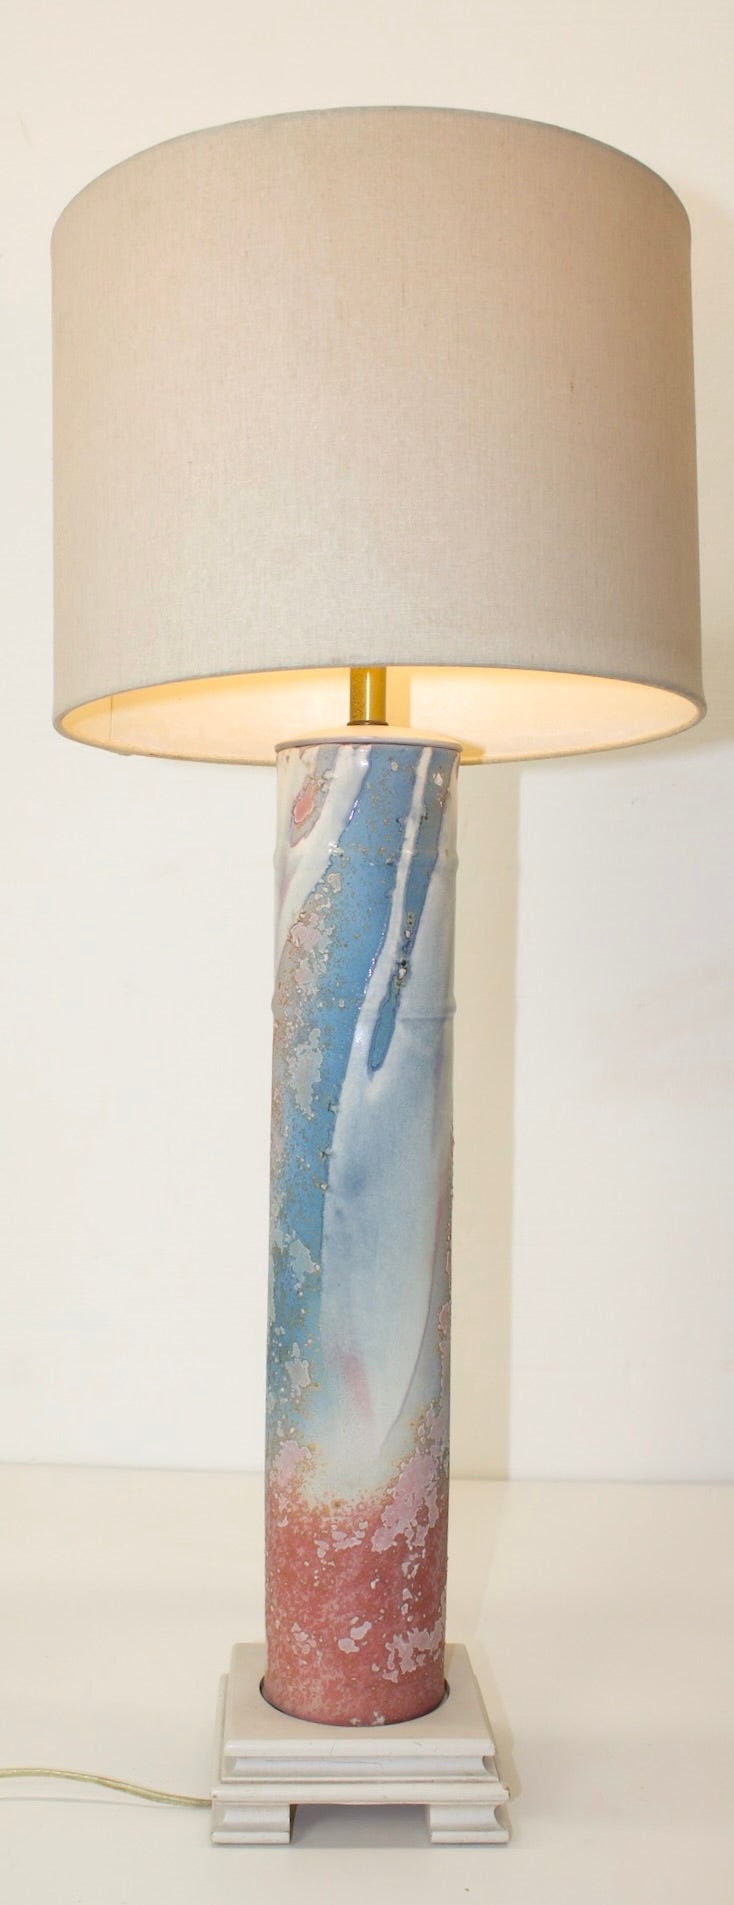 Superior 20th Century Table Lamps like thisHigh Modernist Painted Metal Cylinder Table Lamp from OffCenterModern